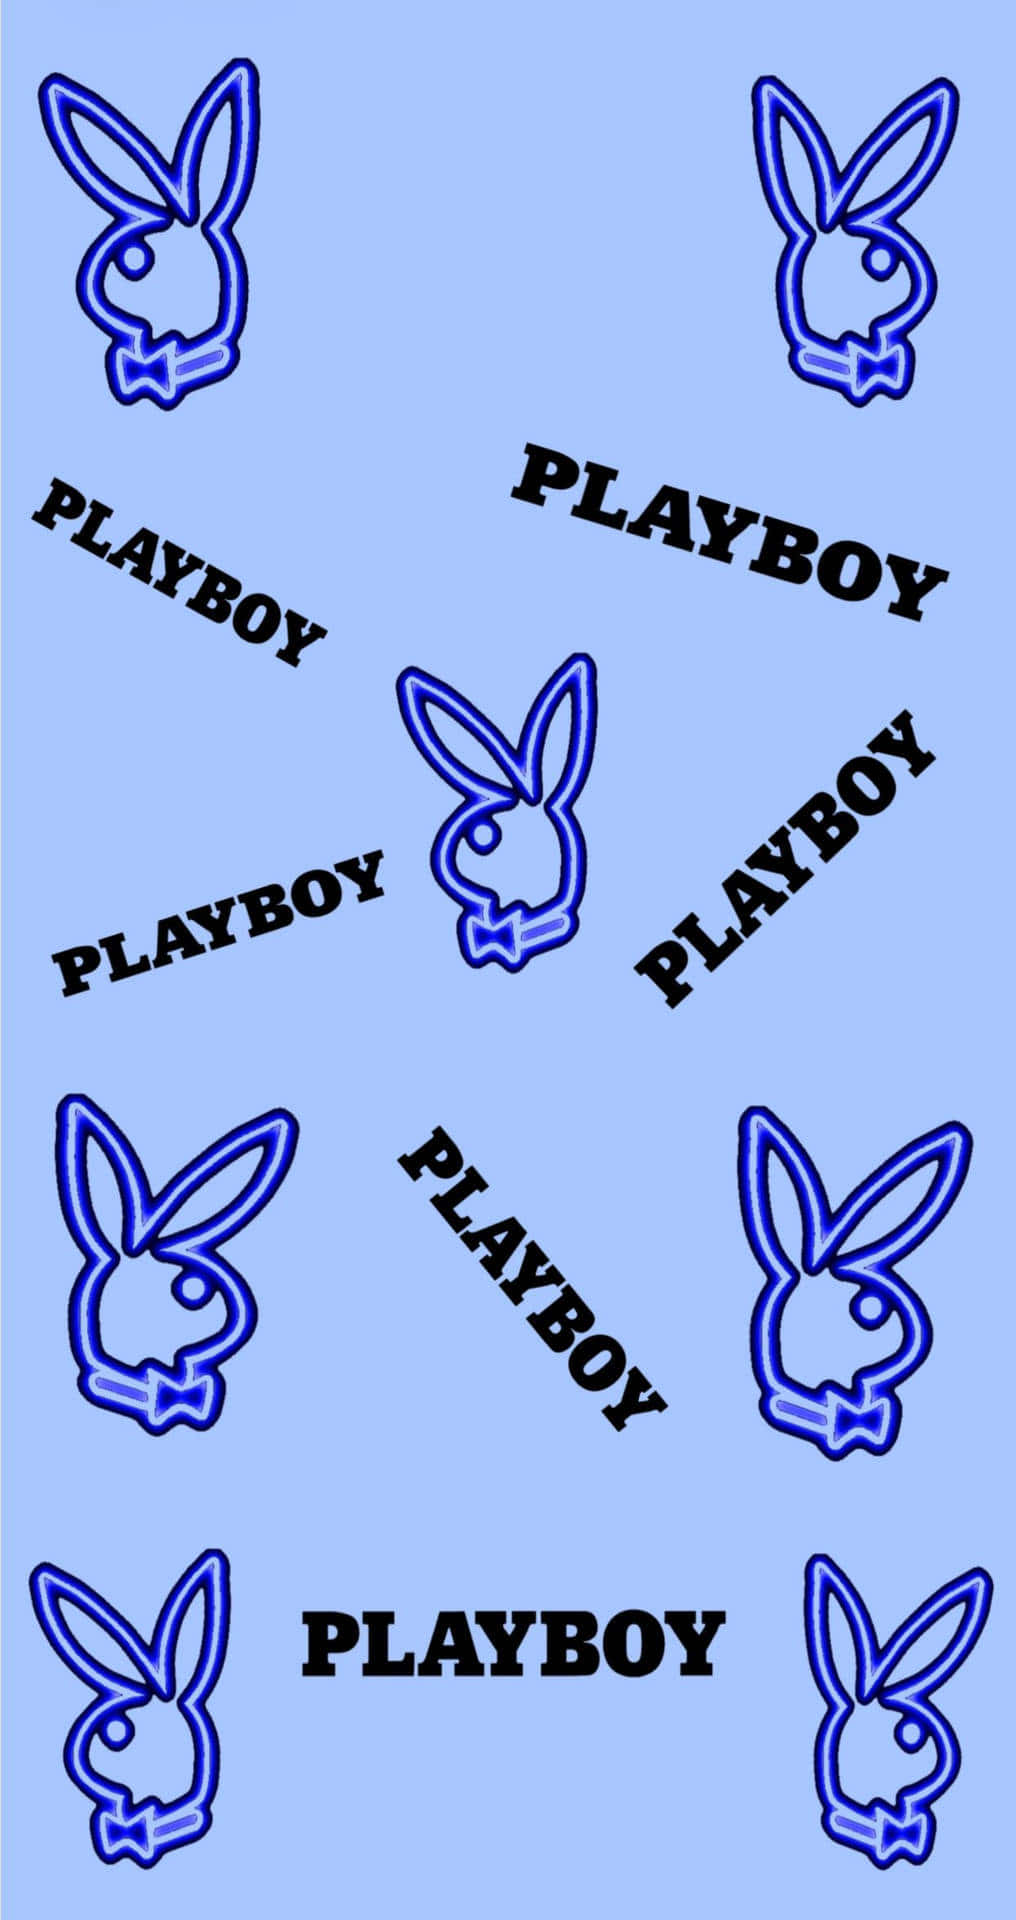 Embrace the Vintage Playboy Aesthetic